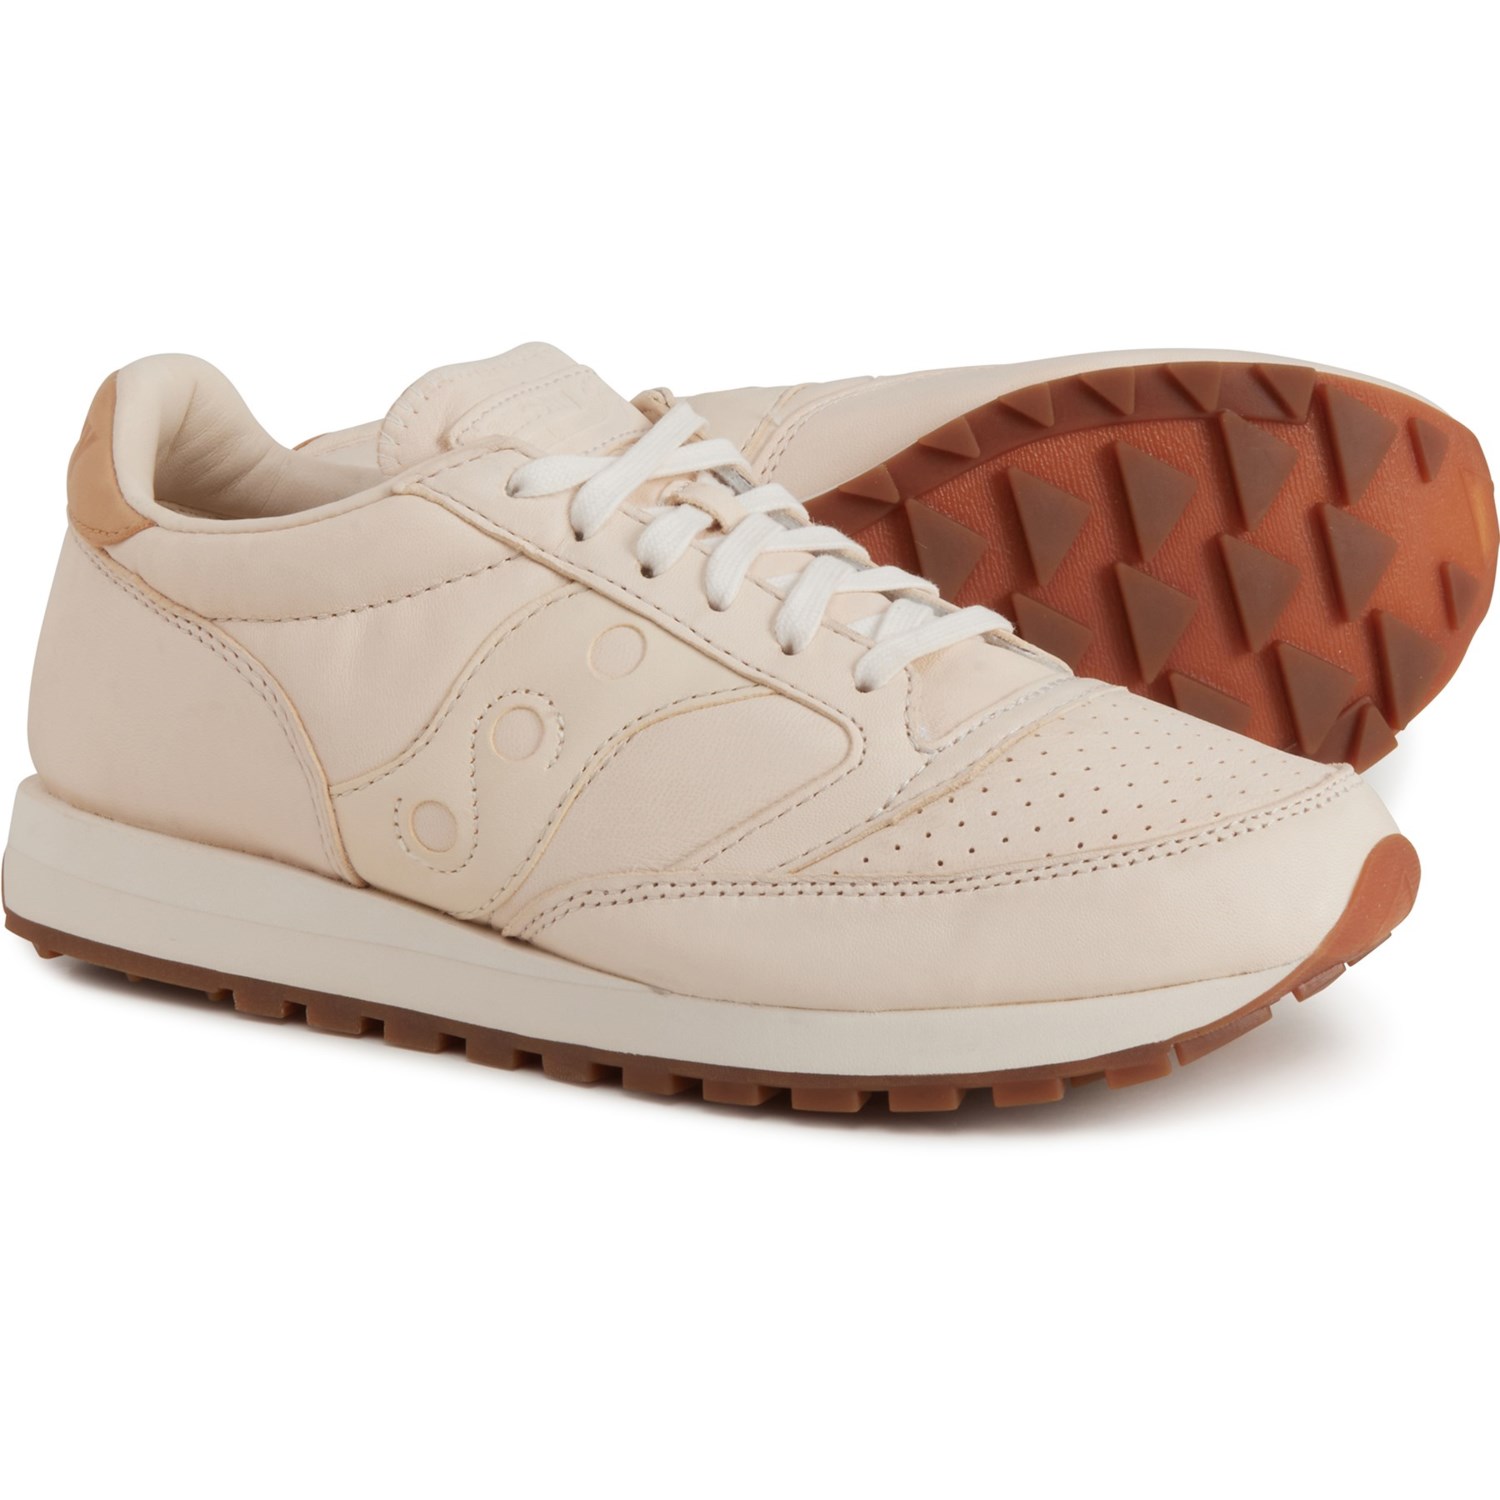 Saucony Fashion Running Shoes - Leather (For Men)